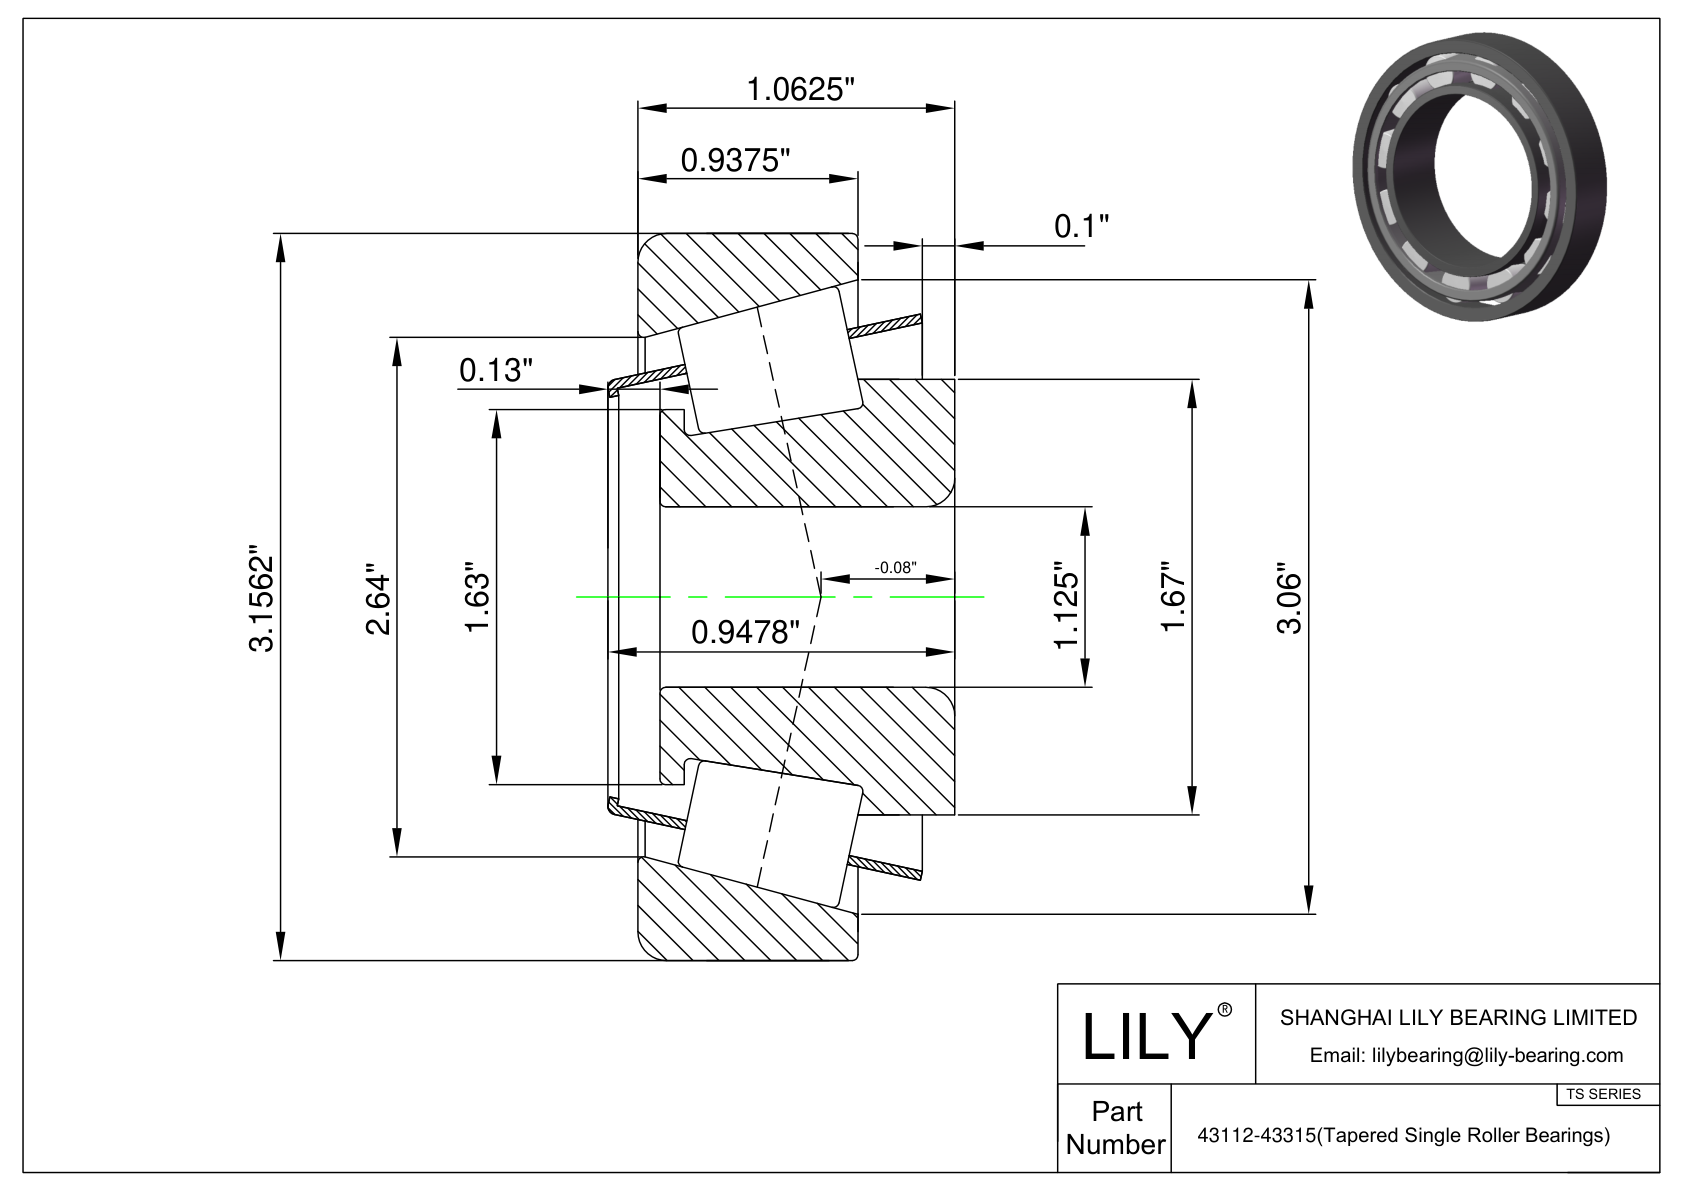 43112-43315 TS (Tapered Single Roller Bearings) (Imperial) cad drawing